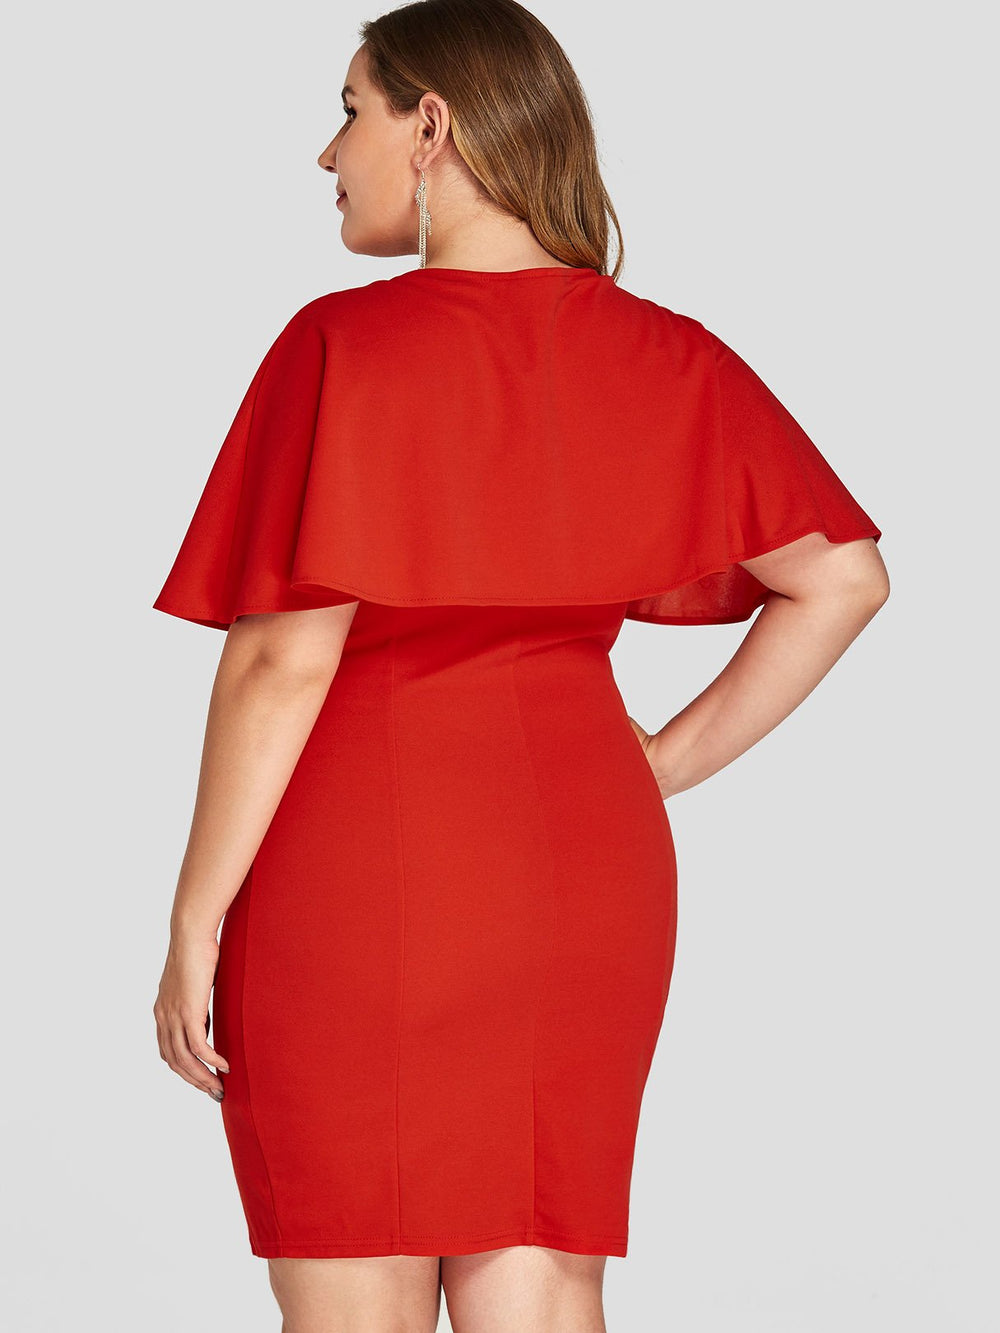 Where To Buy Plus Size Party Dresses